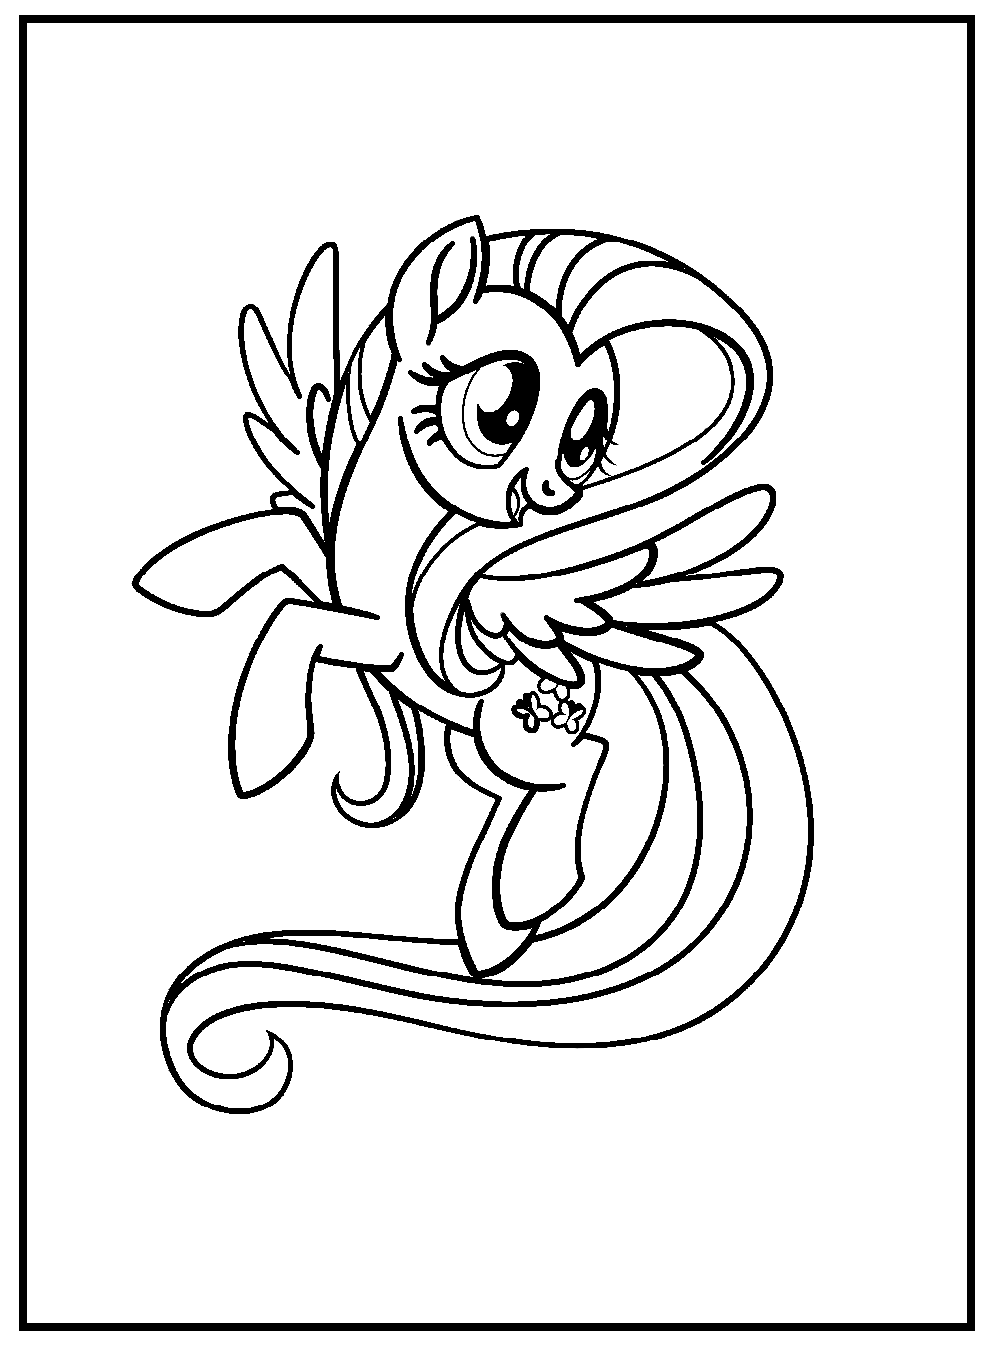 Free Printable Fluttershy MLP Coloring Page